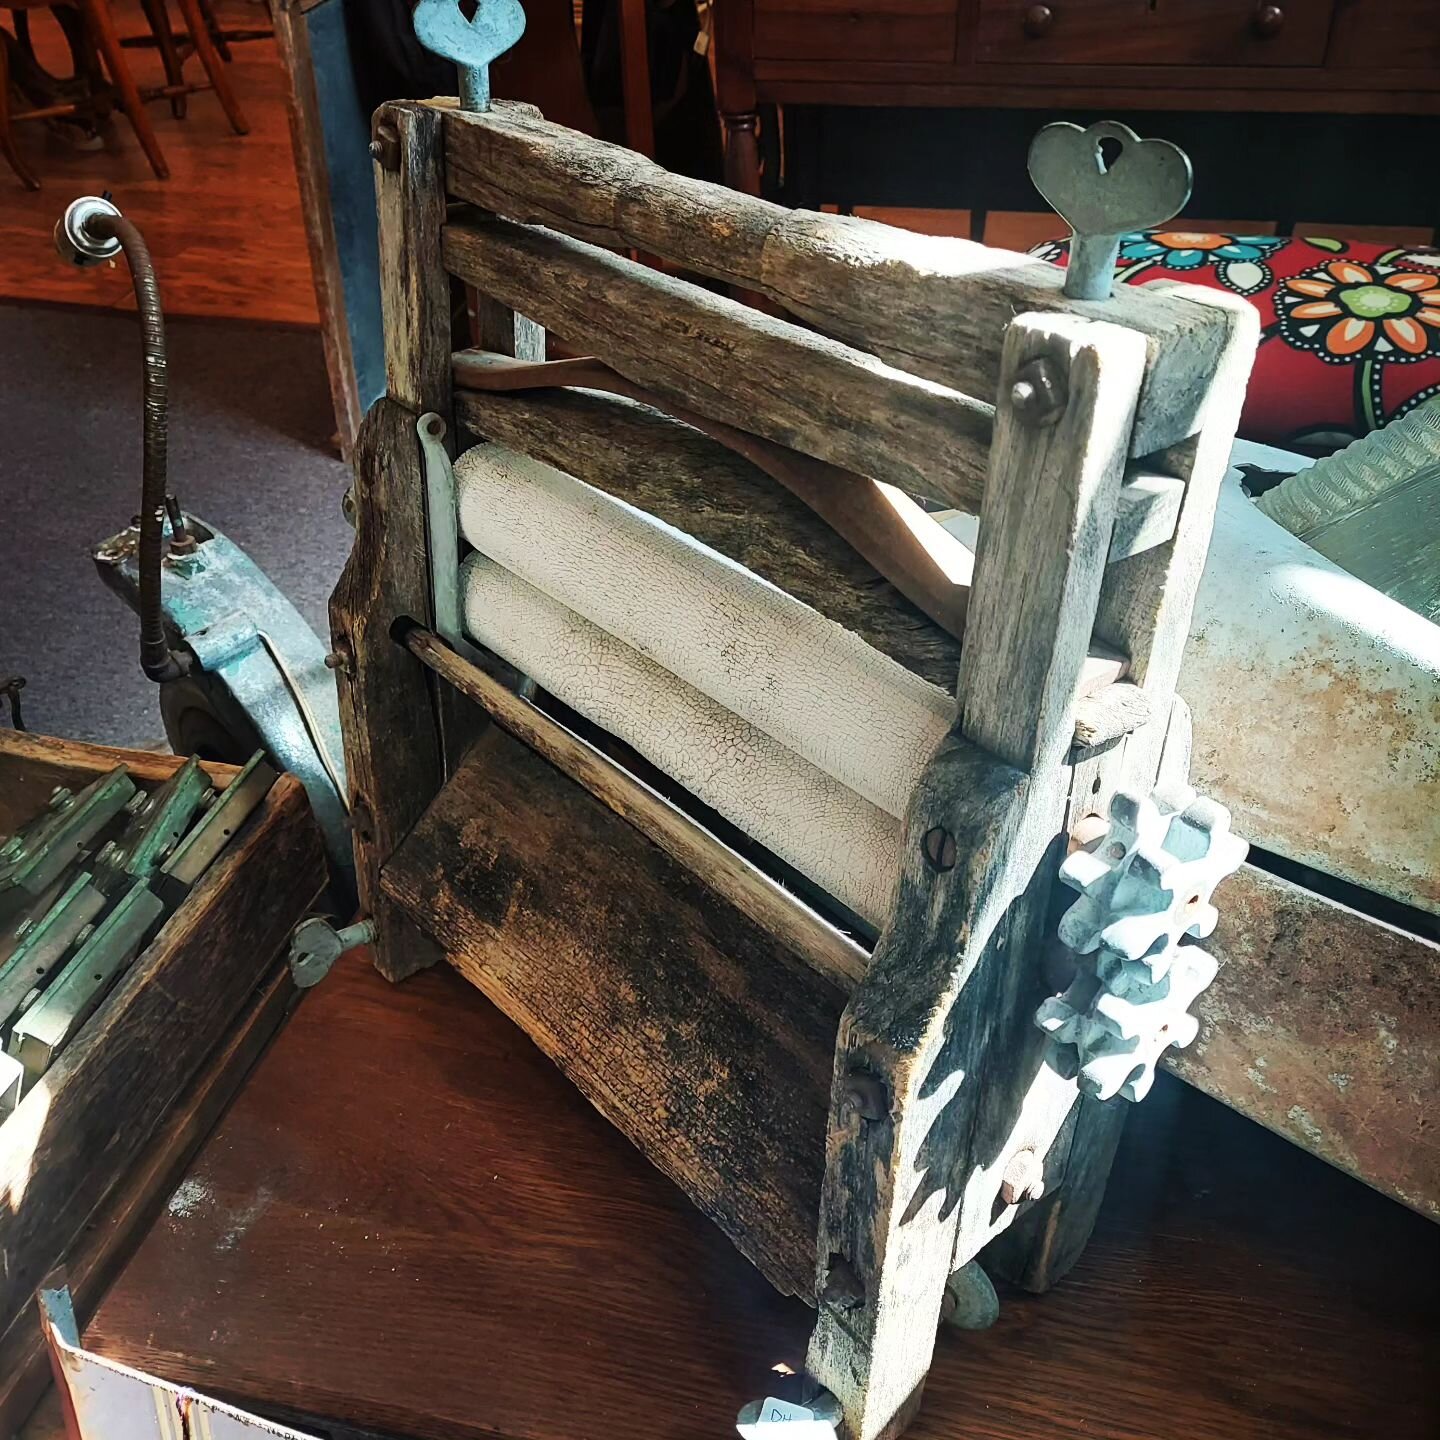 I'm glad this isn't how I have to do the laundry. But I dig the object-ness of this antique wash wringer.

#antiques #vintageshop #wringerwasher